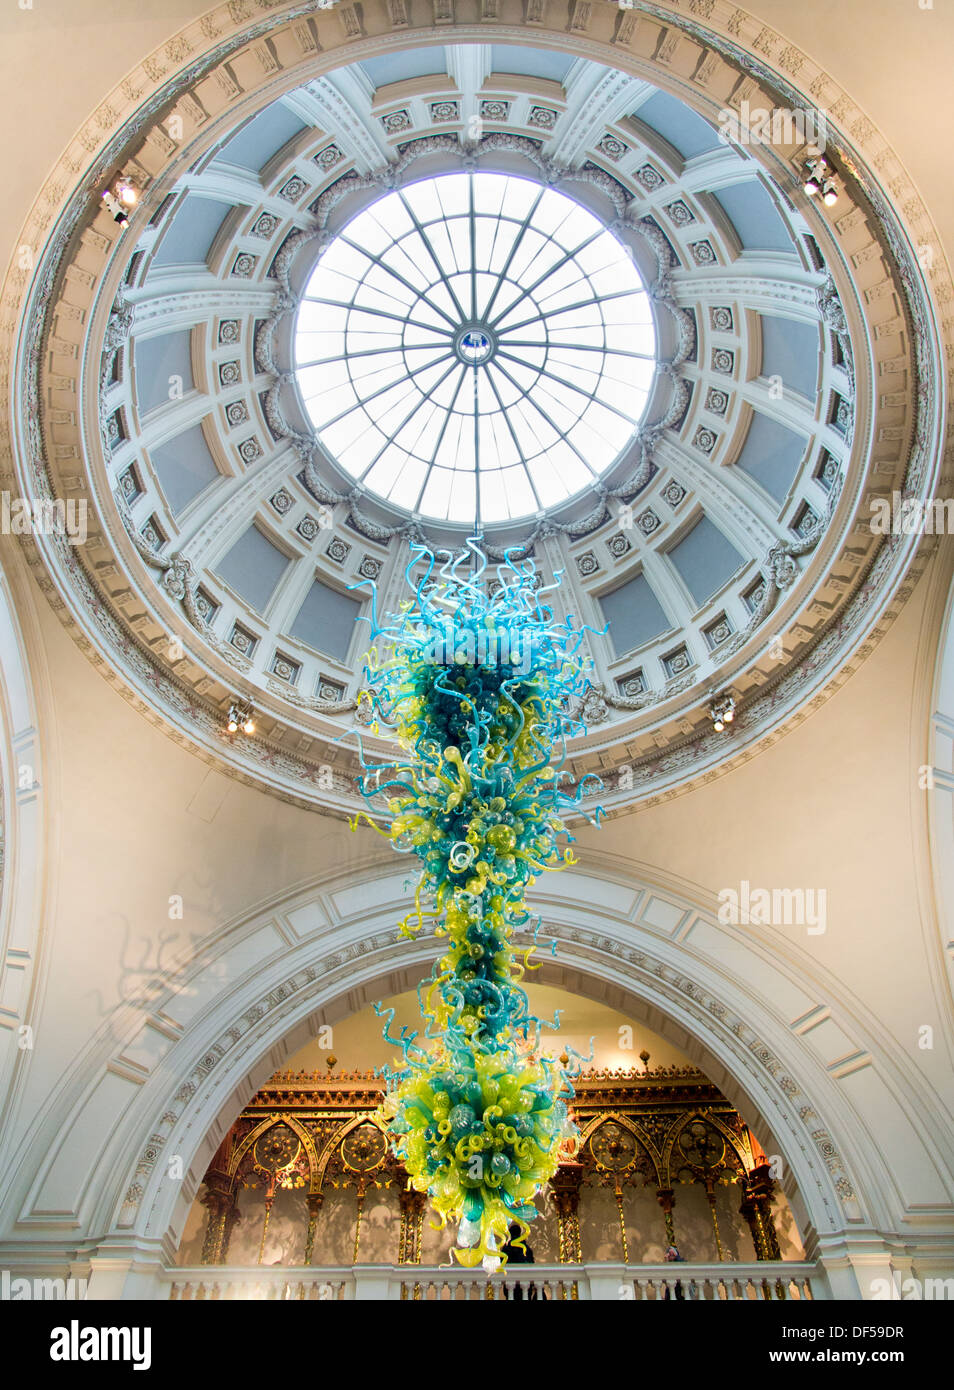 The Victoria and Albert Museum, London - hanging glass sculpture in the atrium. 2 Stock Photo